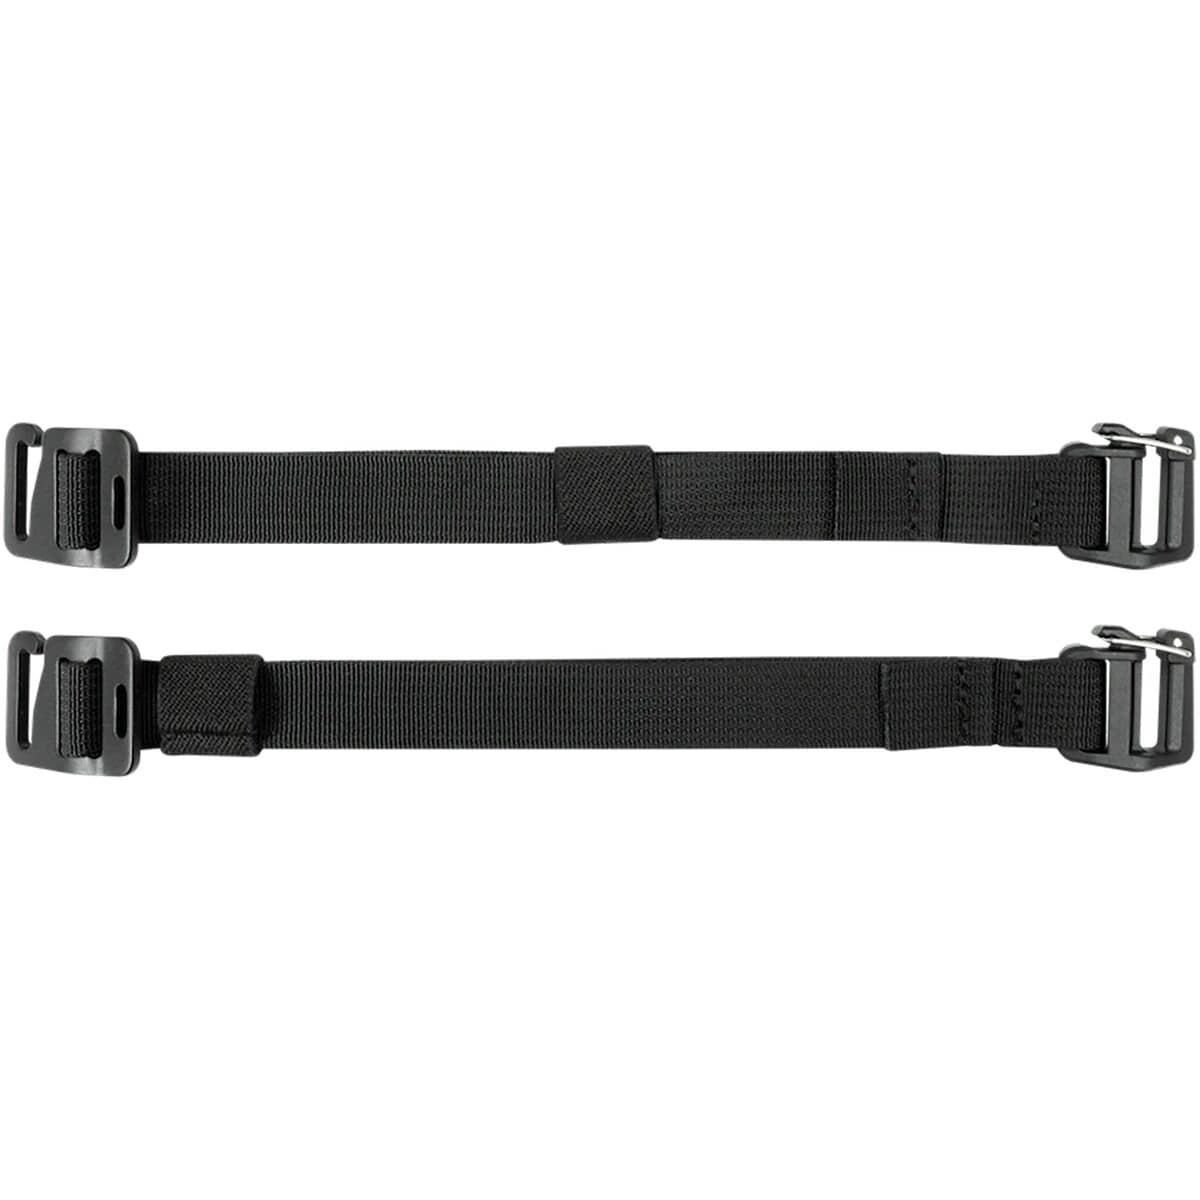 ABS Avalanche Rescue Devices A.Light - Snowboard Strap